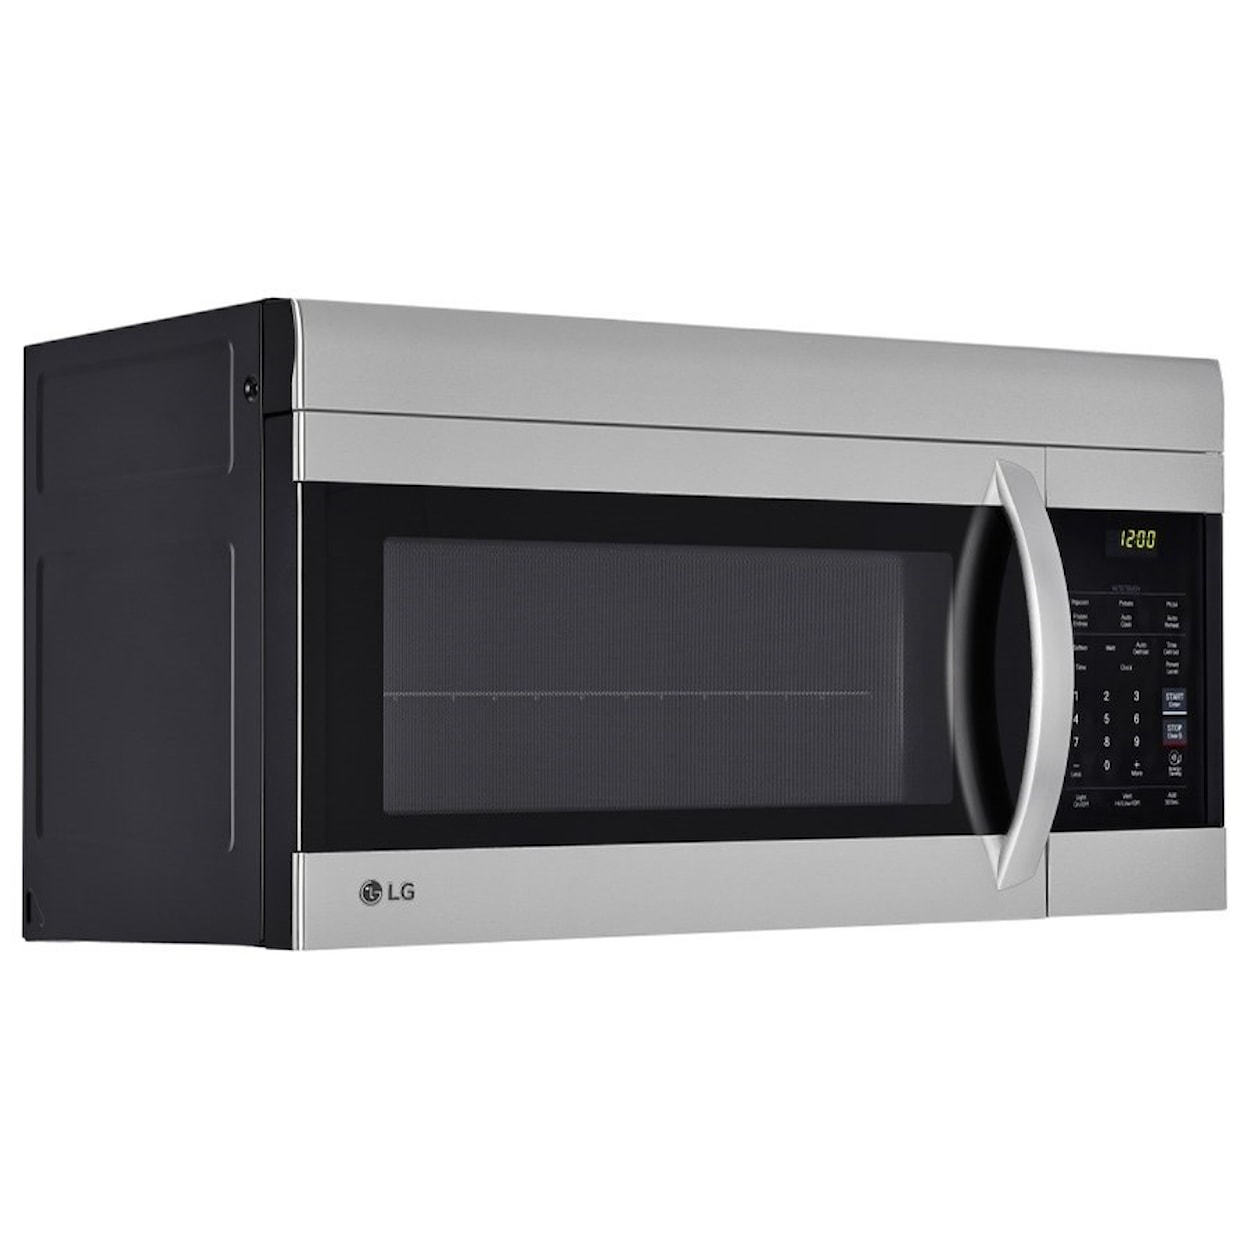 LG Appliances Microwaves 1.7 cu.ft. Over-the-Range Microwave Oven